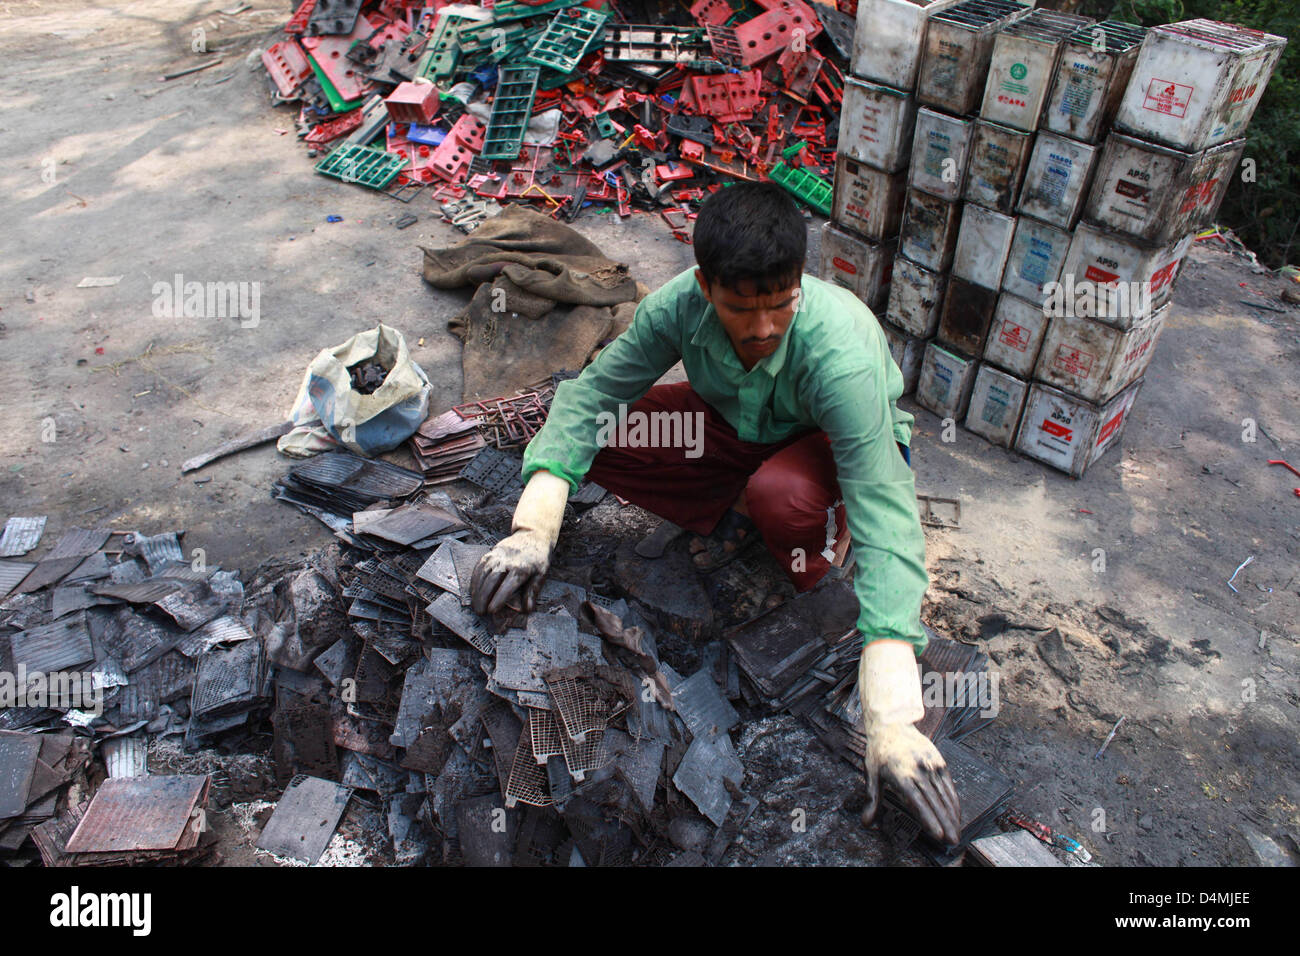 In Bangladesh people dispose of batteries in open air, these are harmful for environment and people. For humans, both lead and cadmium can be taken only by ingestion or inhalation. Mercury another harmful metals can even be absorbed through the skin. Stock Photo